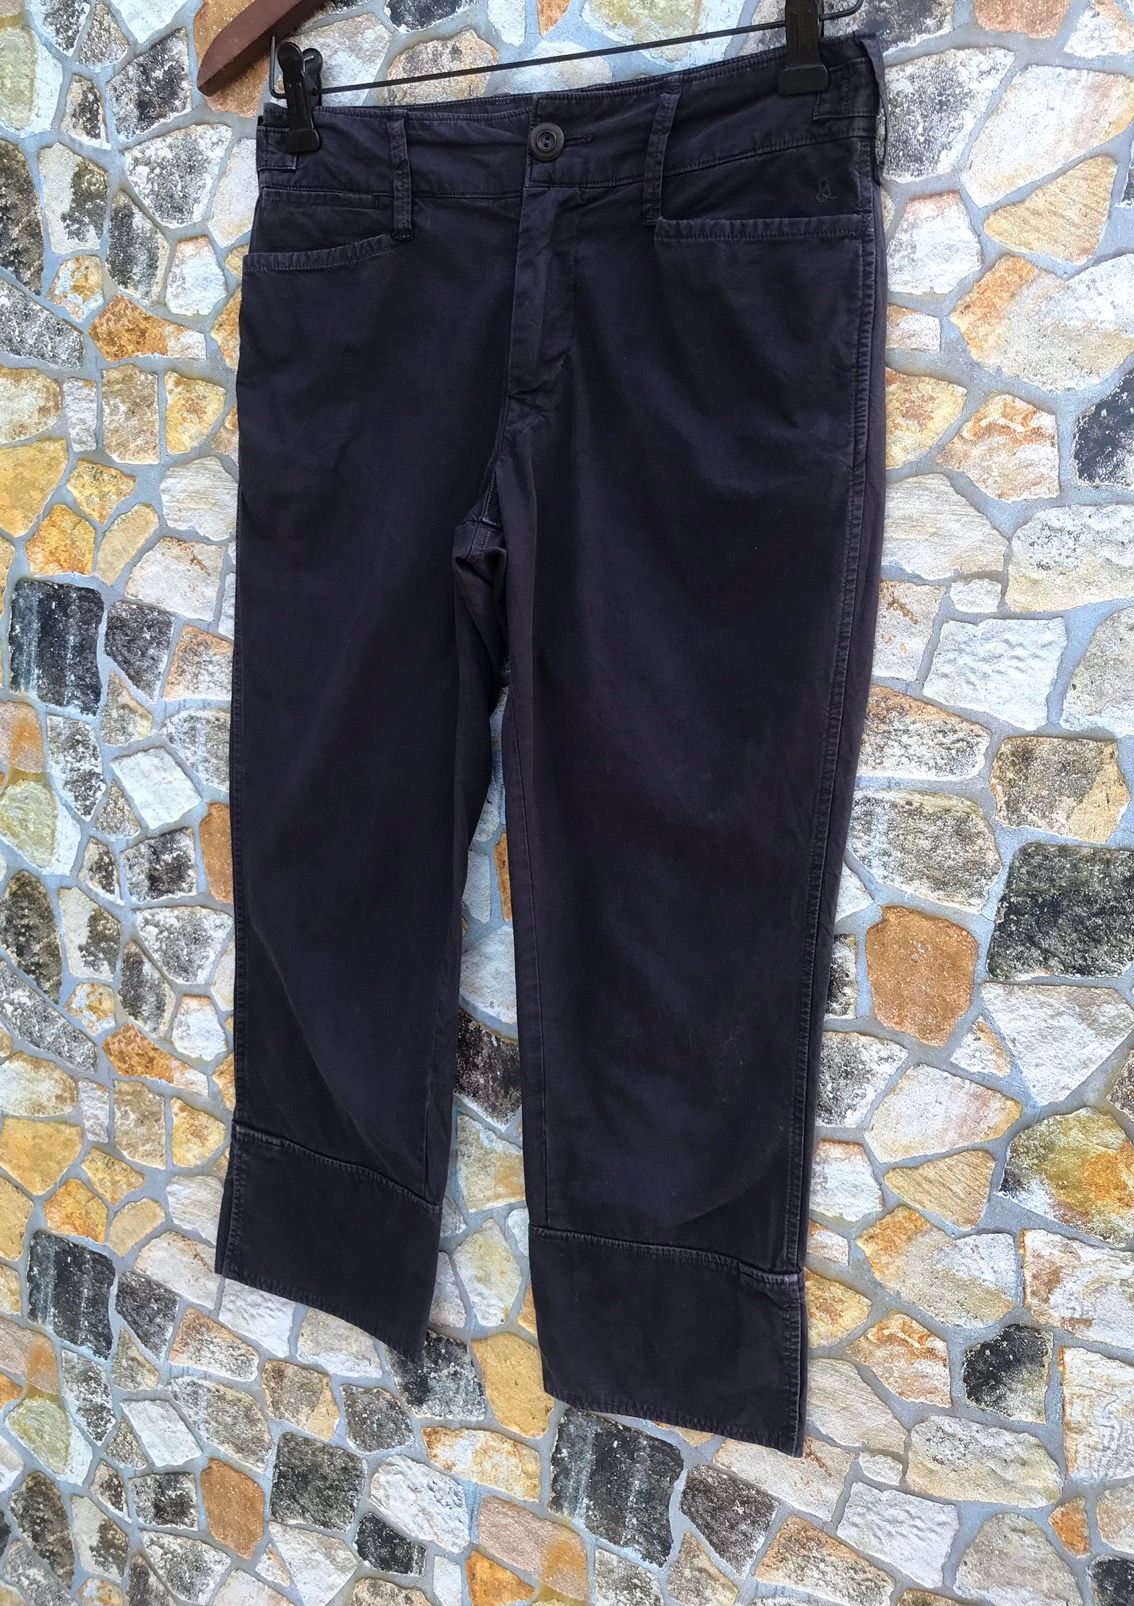 45Rpm Pants Made In Japan - 5